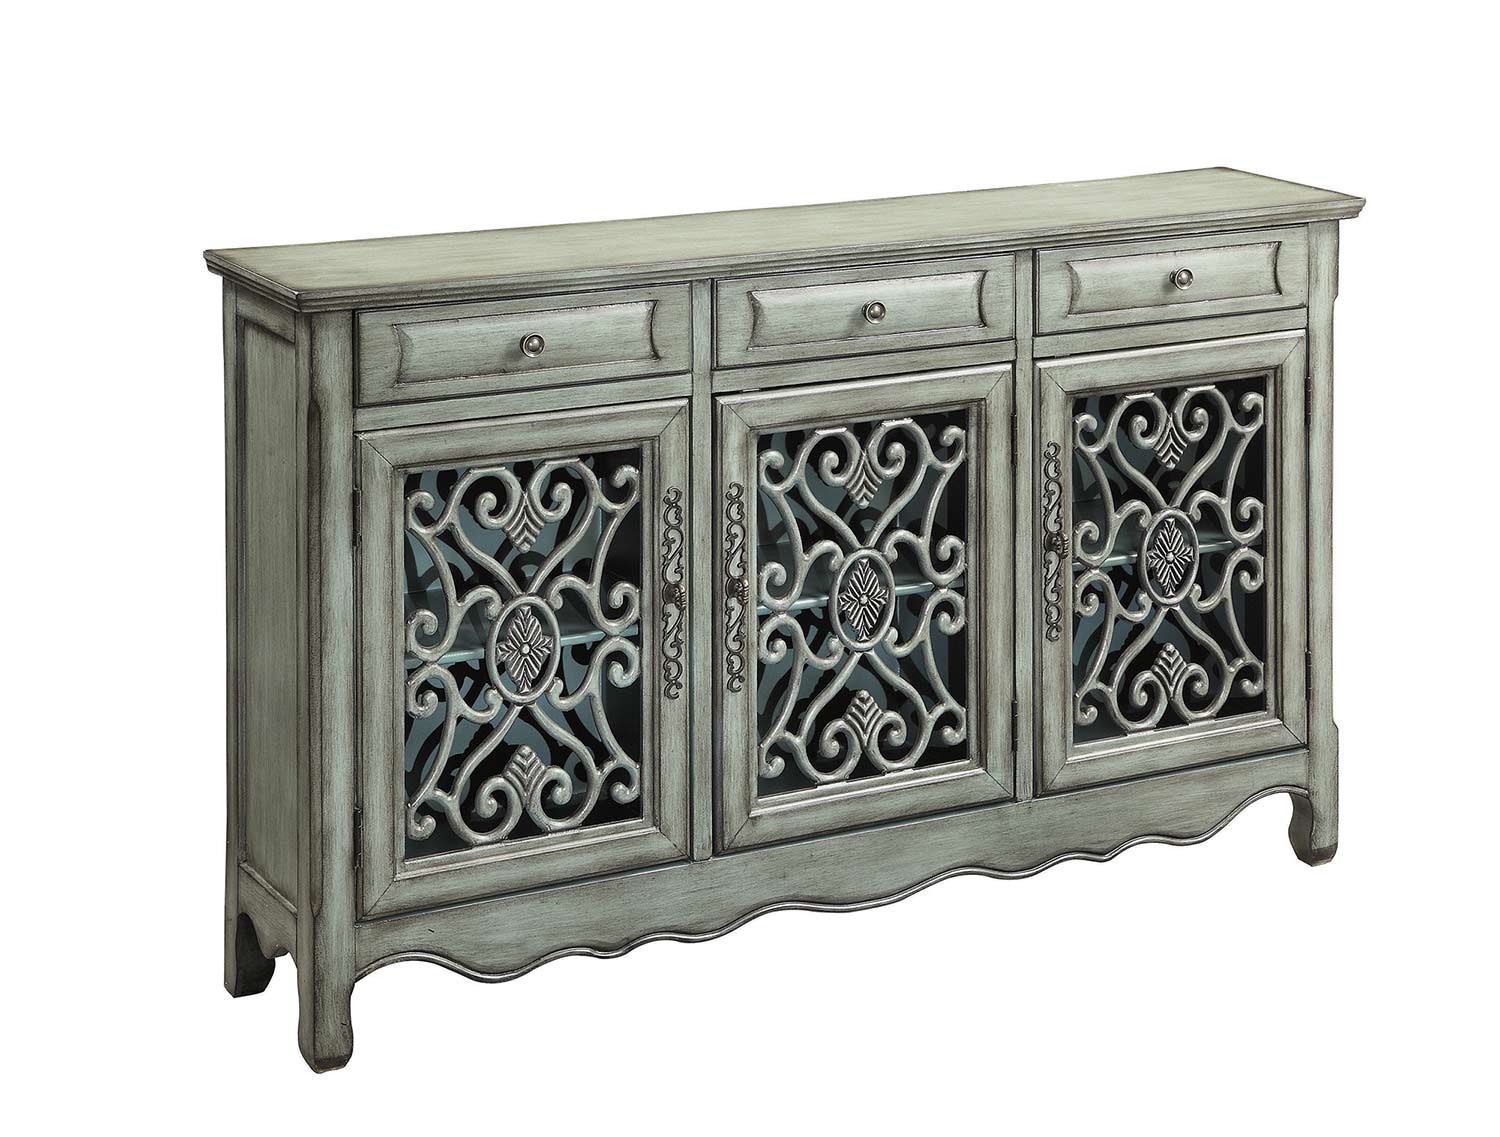 Coaster 950357 Accent Cabinet - Antique Green